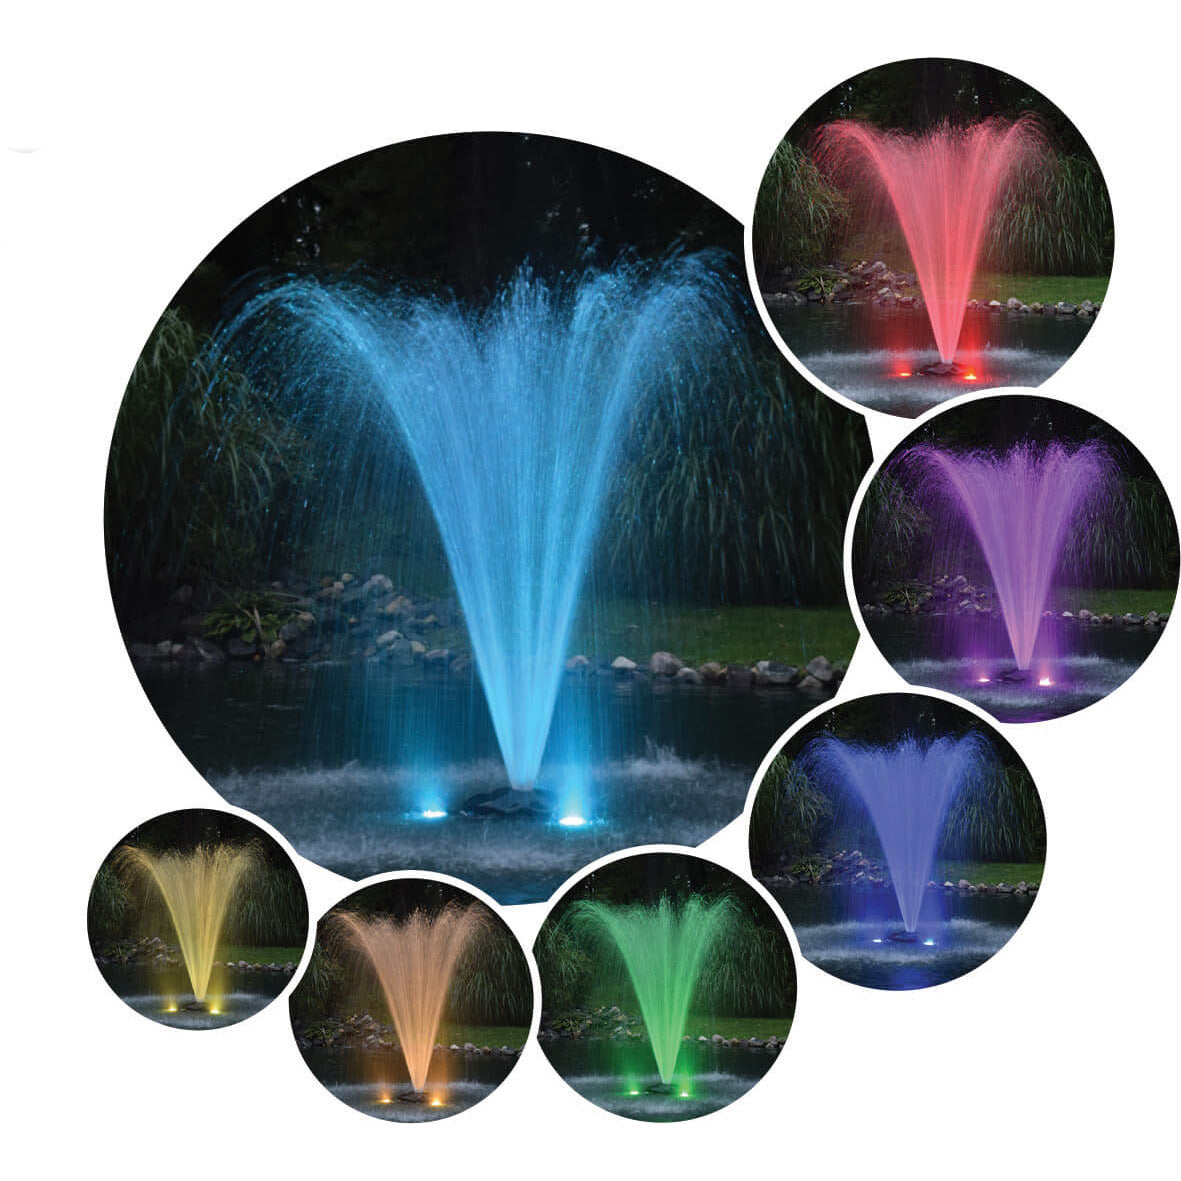 Seven images of fountains in different colors using the RGB2-100 AquaShine Two Light Color Changing LED Fountain Light Kits | Your Pond Pros